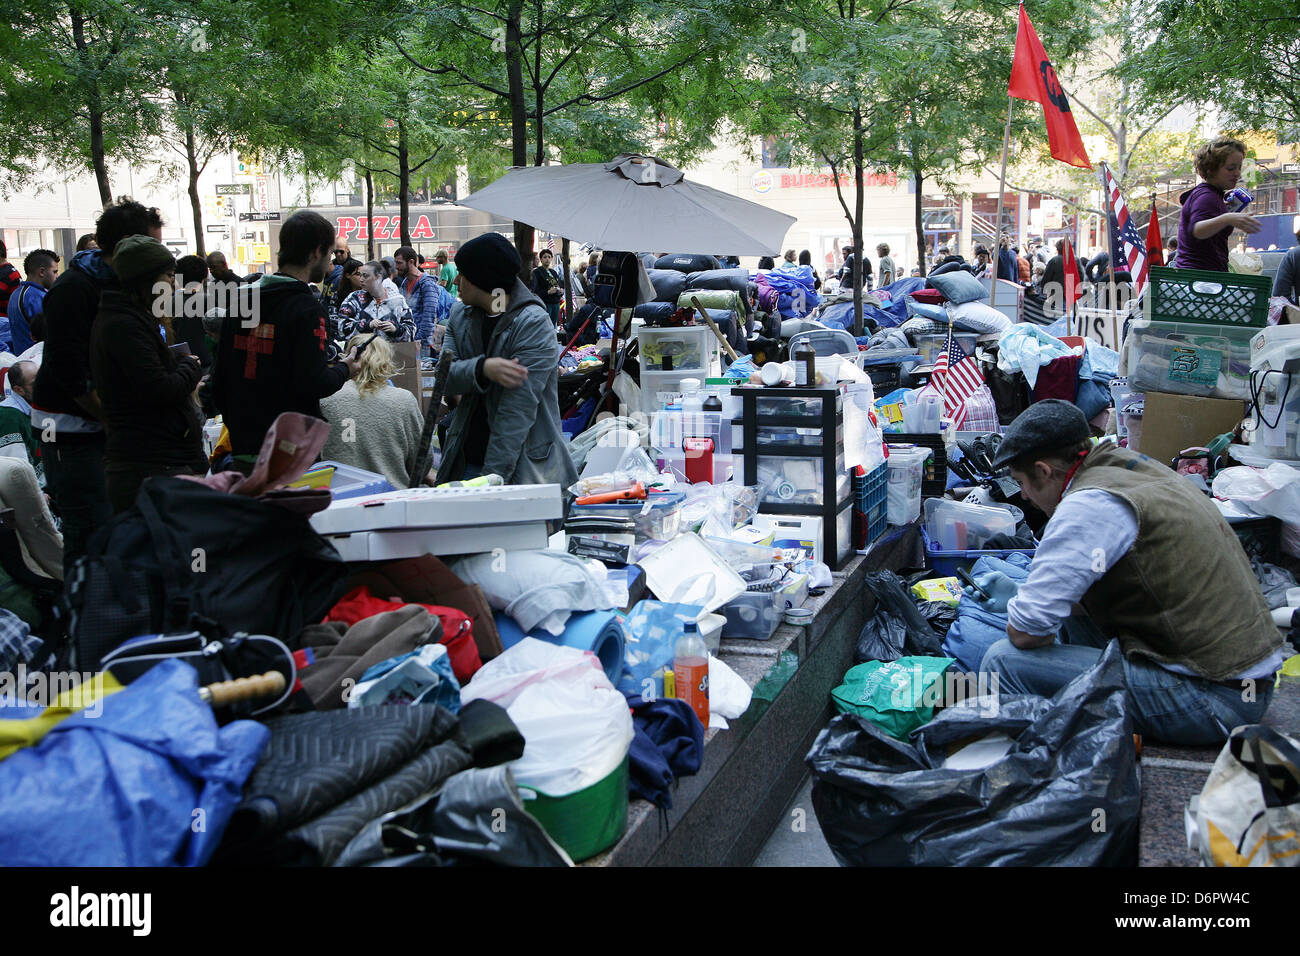 Trash builds up at the Occupy Wall Street demonstrations. Occupy Wall Street is an ongoing series of demonstrations in New York Stock Photo